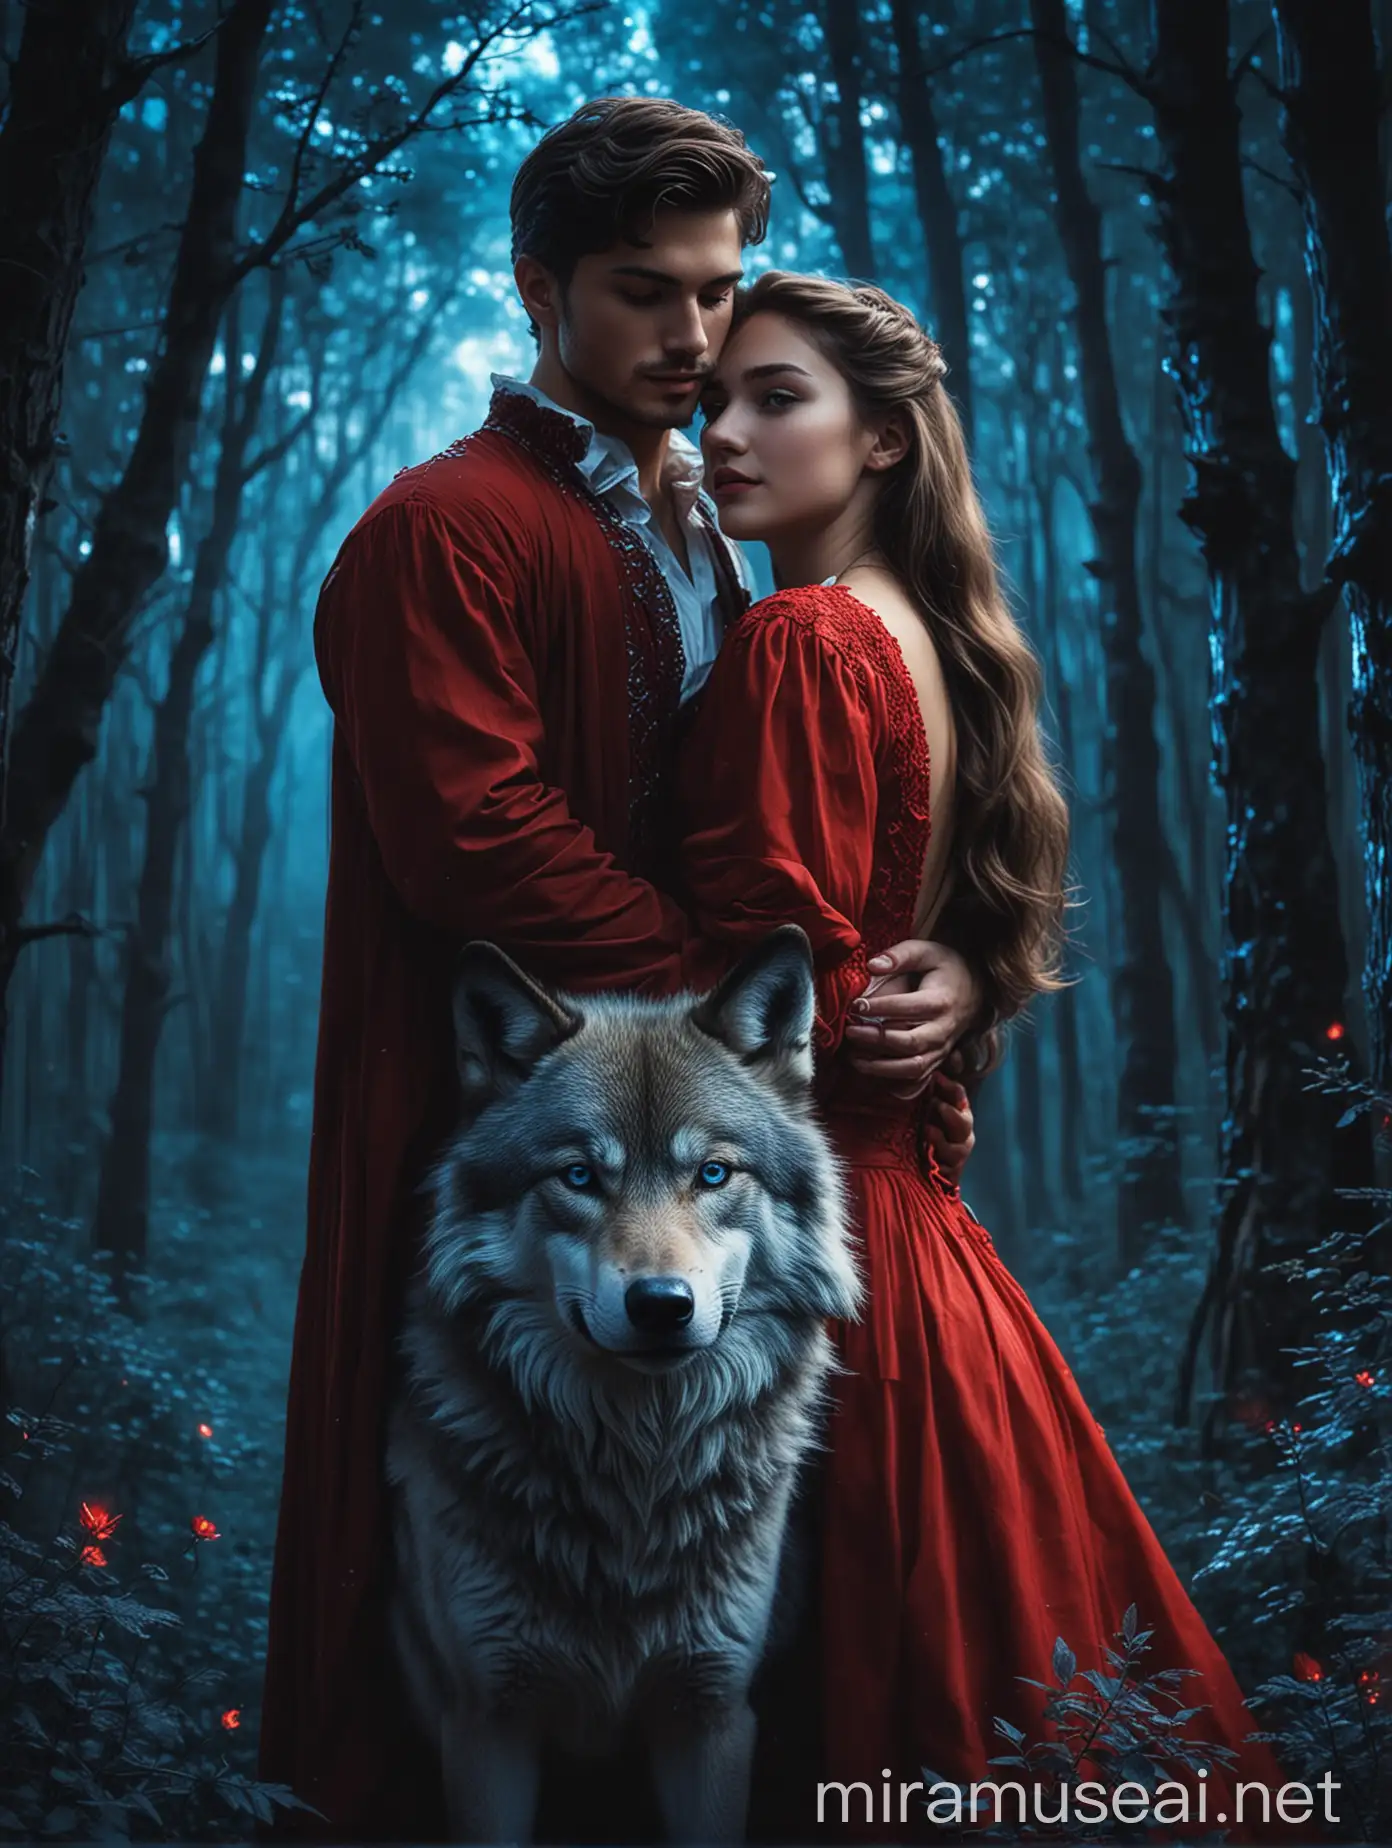 Romantic Couple Embraced in Red Dress with Luminous Blue Forest and Wolf